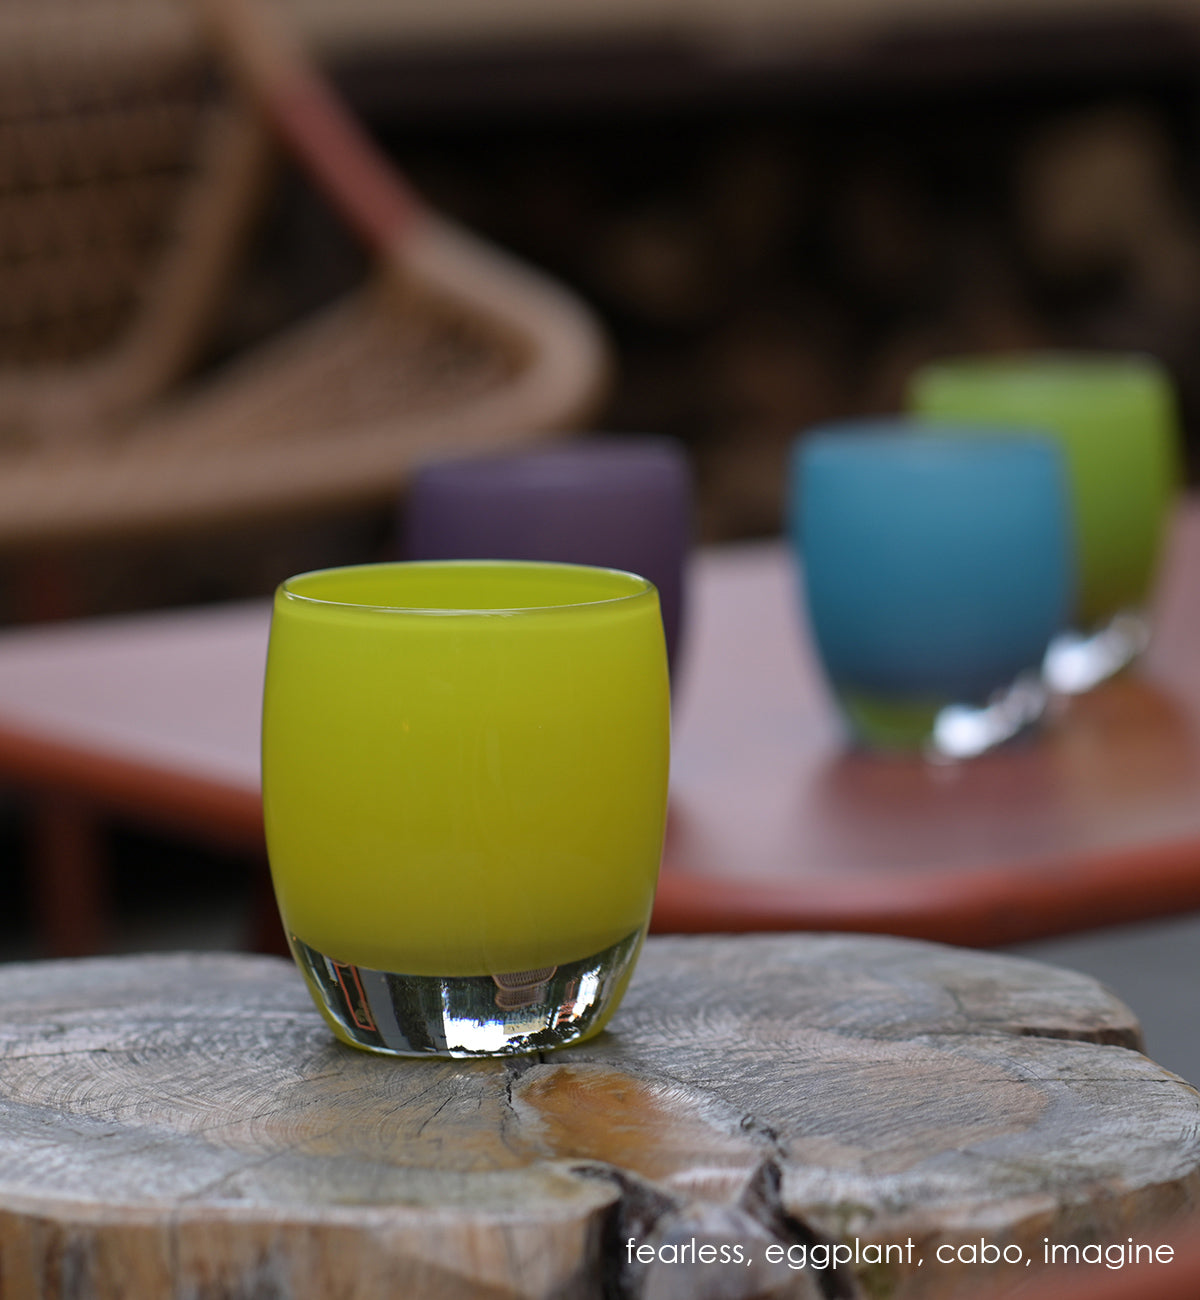 fearless bright yellow hand-blown glass votive candle holder. Paired with eggplant, cabo, and imagine.